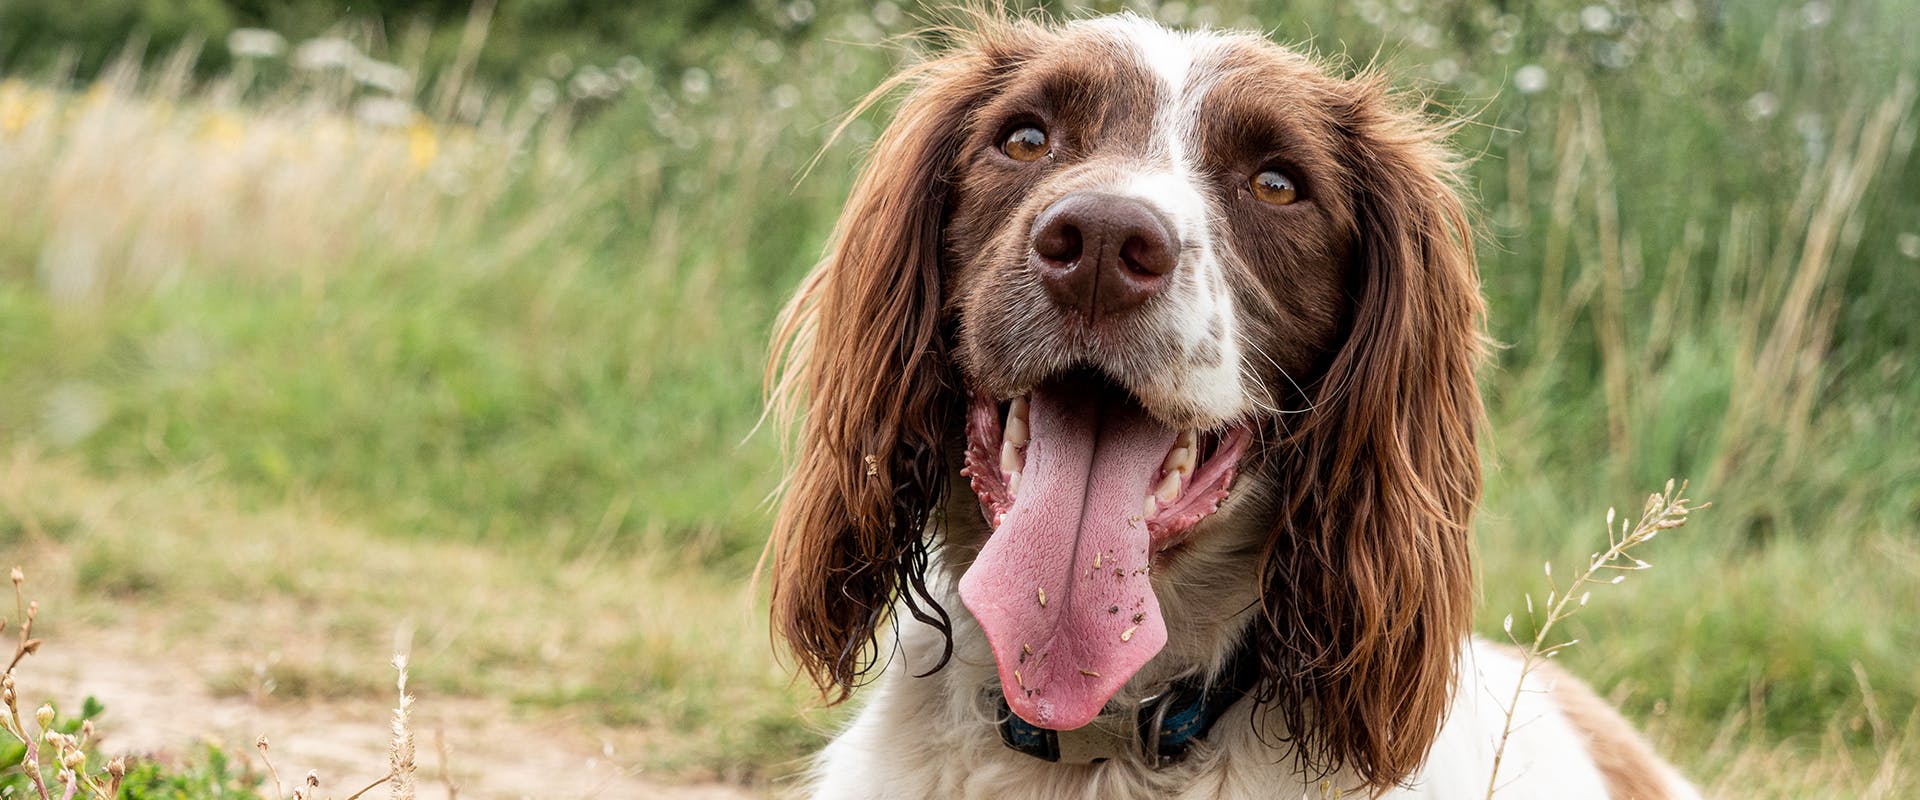 A happy Sprocker Spaniel dog in a field, its tongue lolling out of its mouth